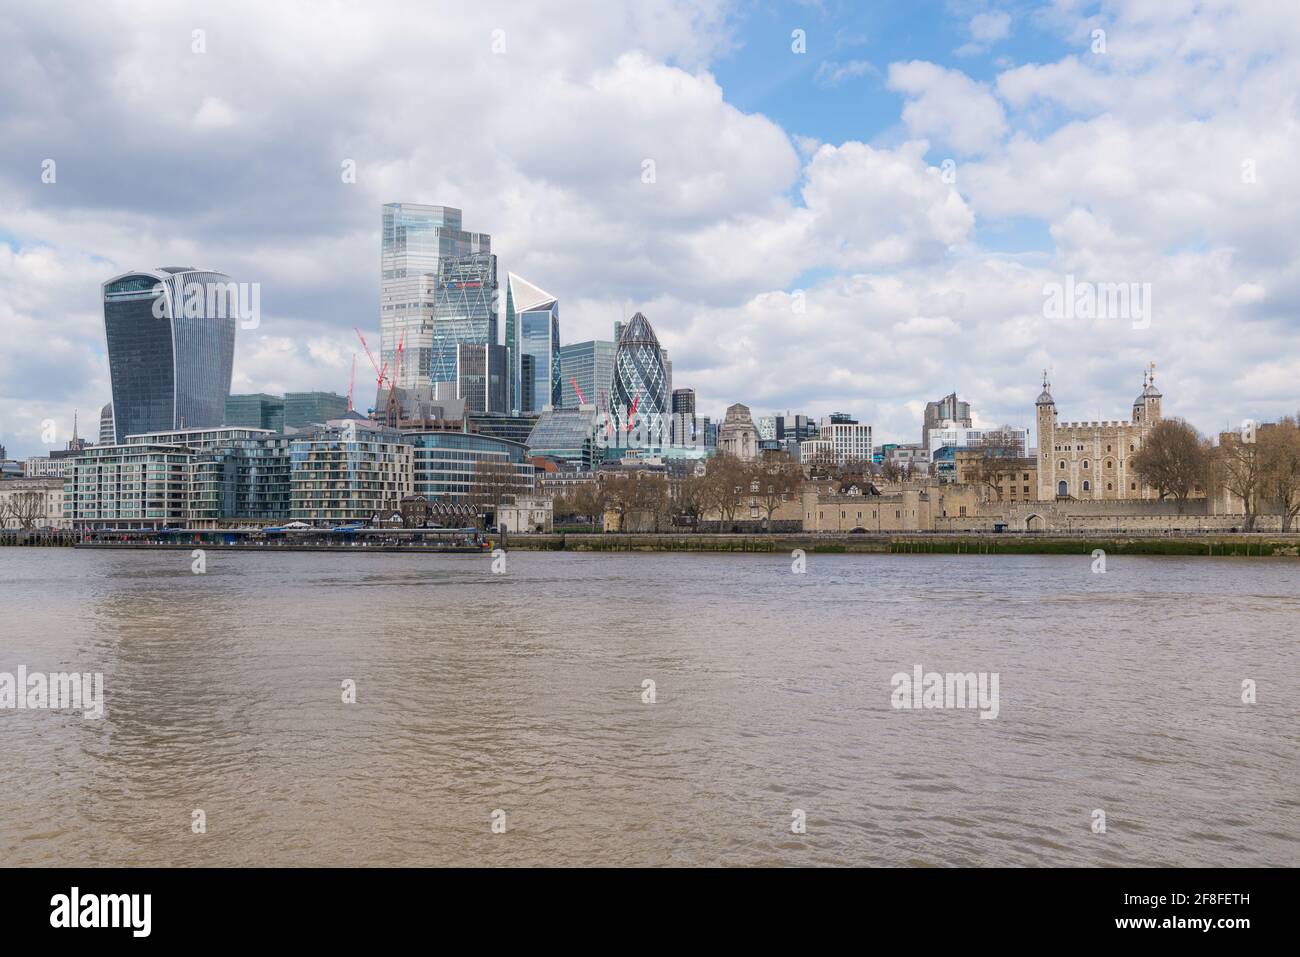 City of London skyline with modern skyscraper buildings as seen from the south side of the Thames and including the historic Tower of London. Stock Photo